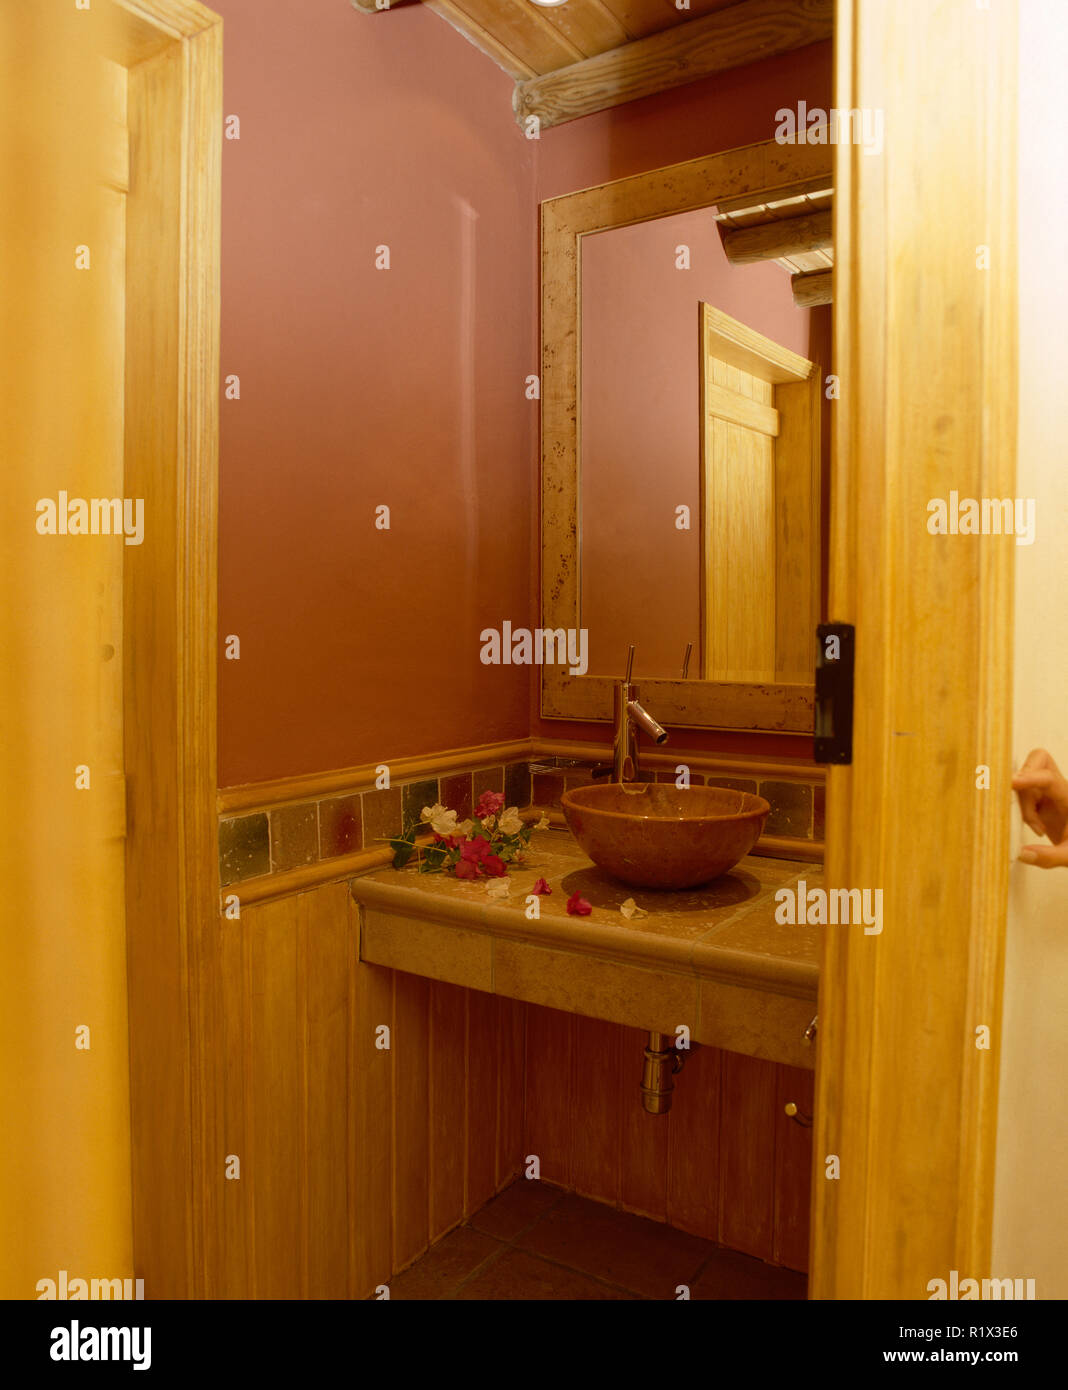 Bowl basin in small cloakroom Stock Photo